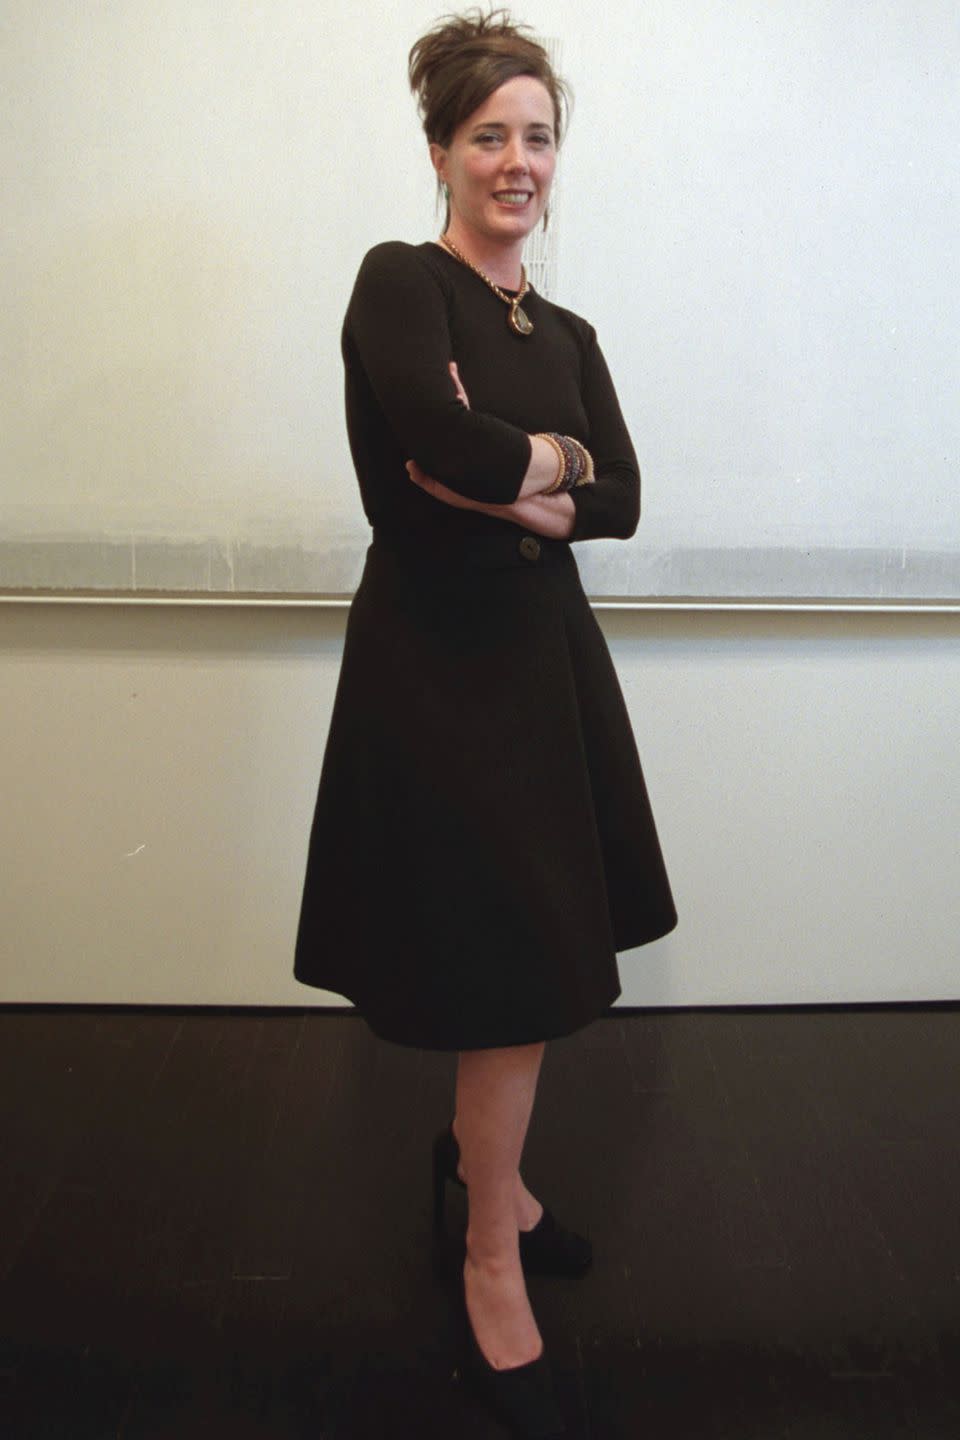 <p>Posing in a black dress, heels, and pendant necklace in 2010.</p>